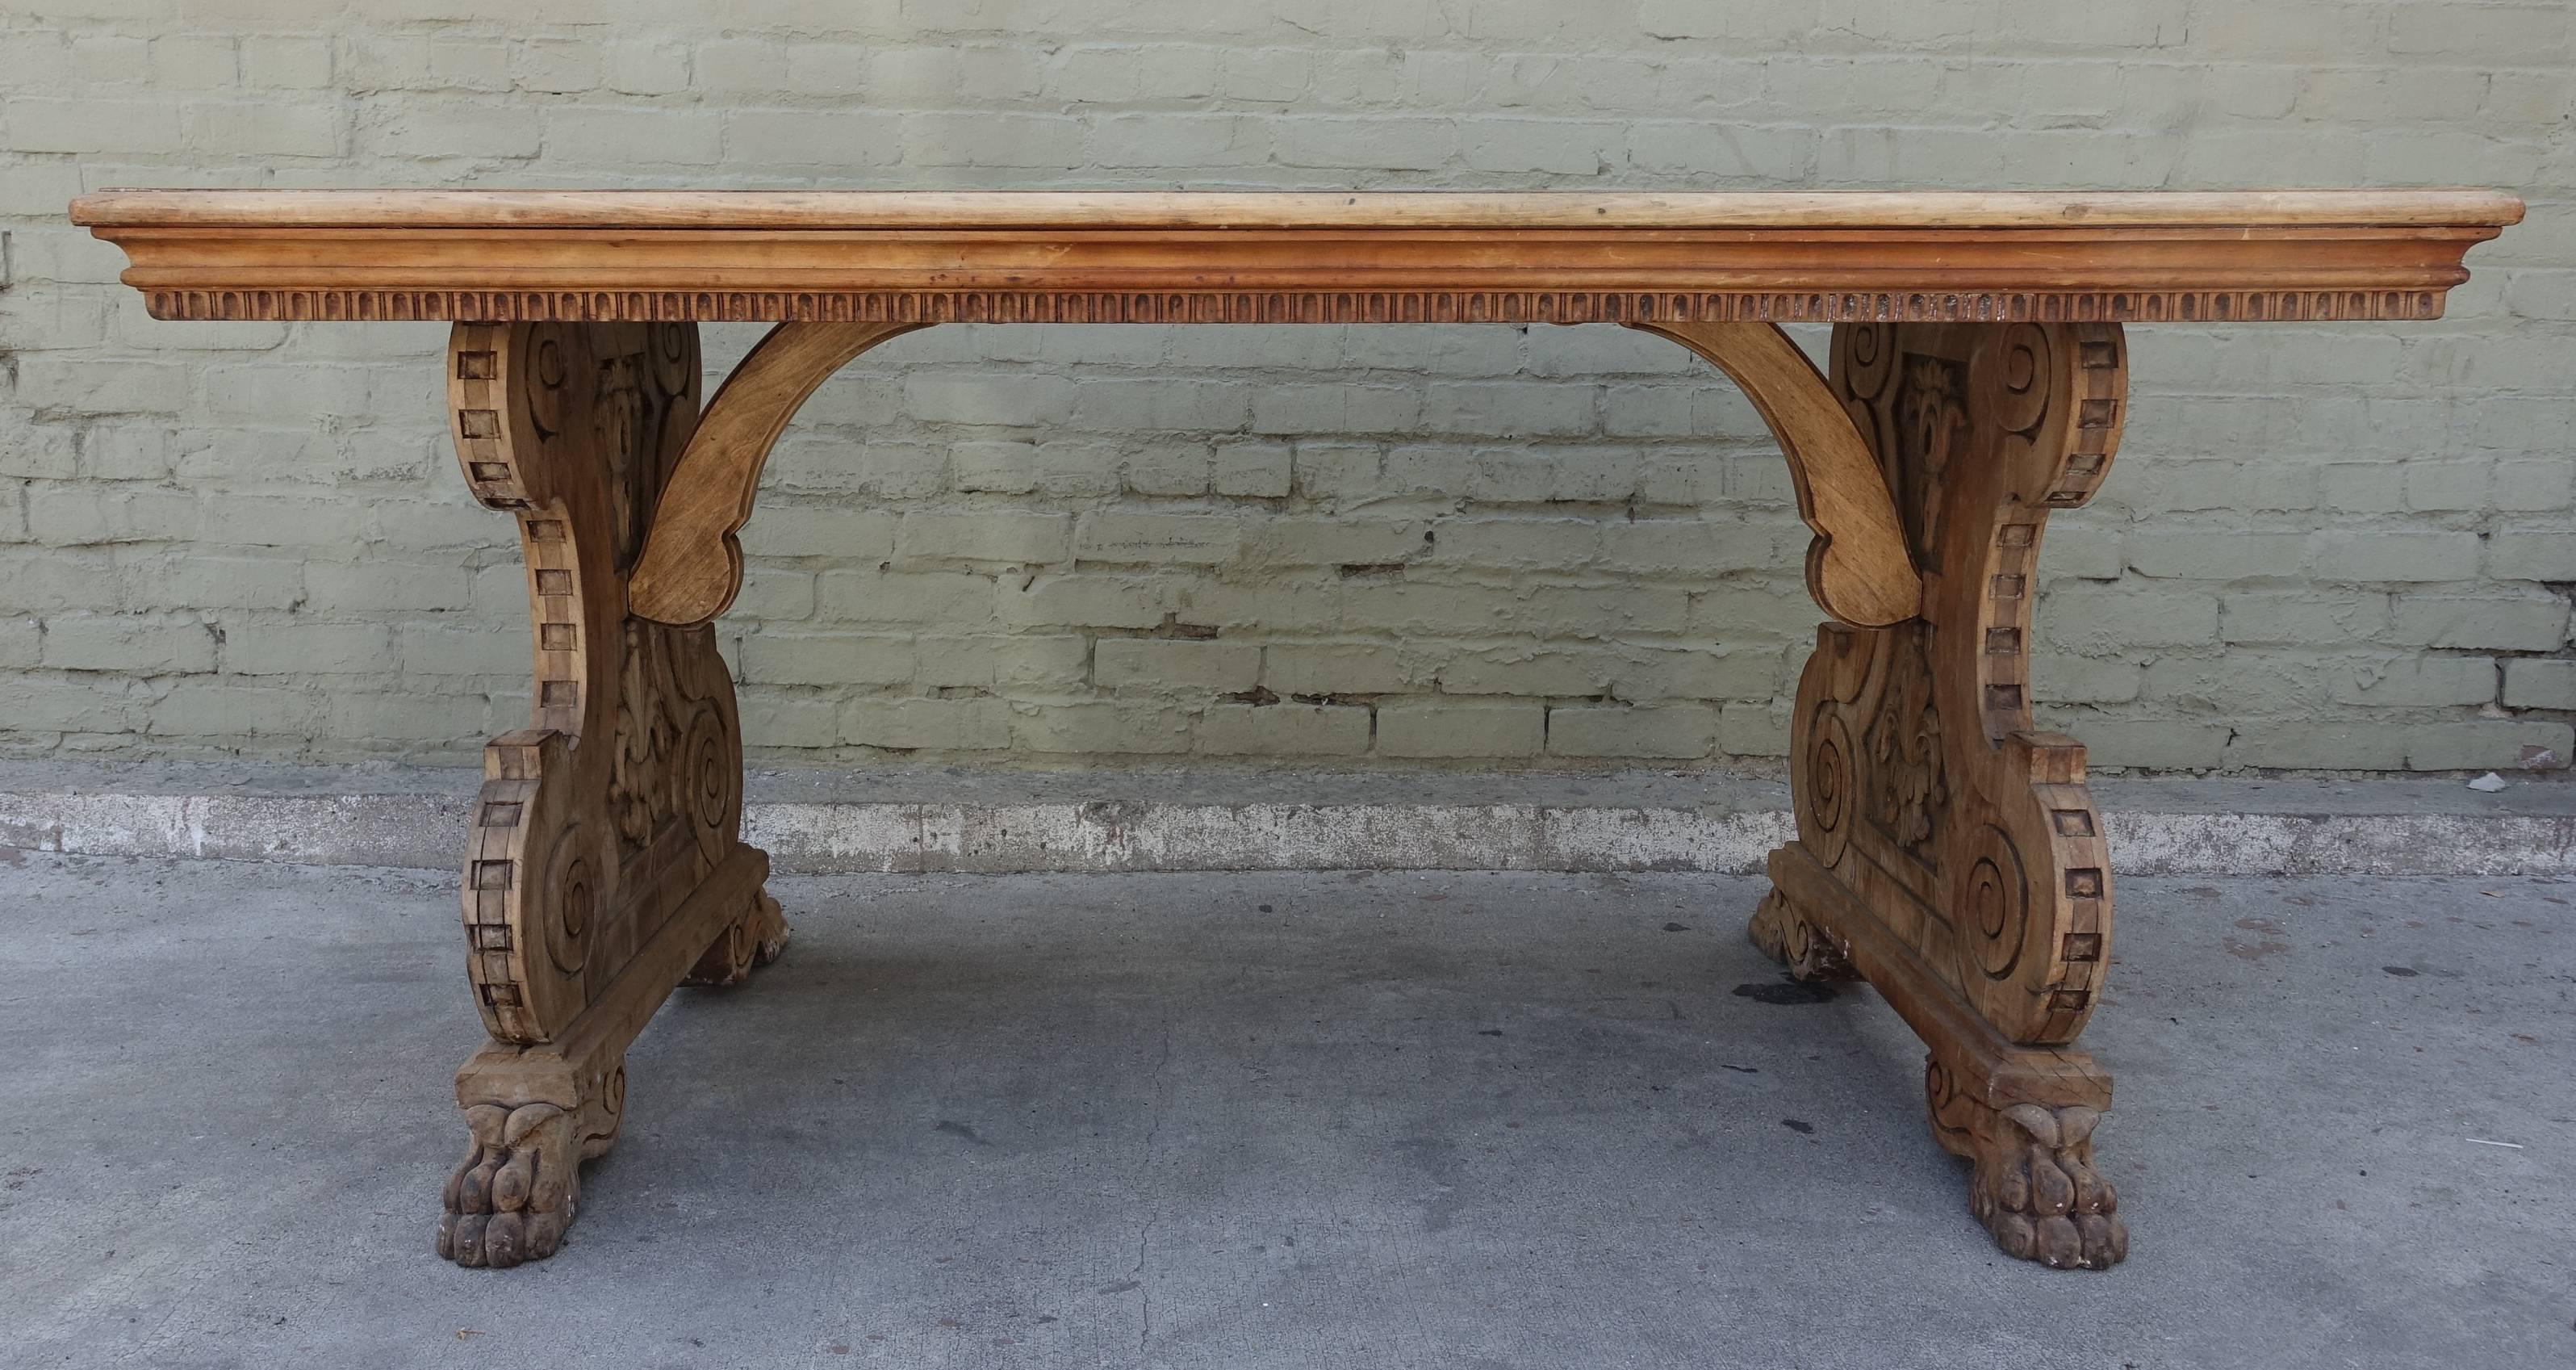 19th century carved Italian trestle style table that features floral carvings on the scrolled ends which each stand on two paw feet. Natural wood finish.